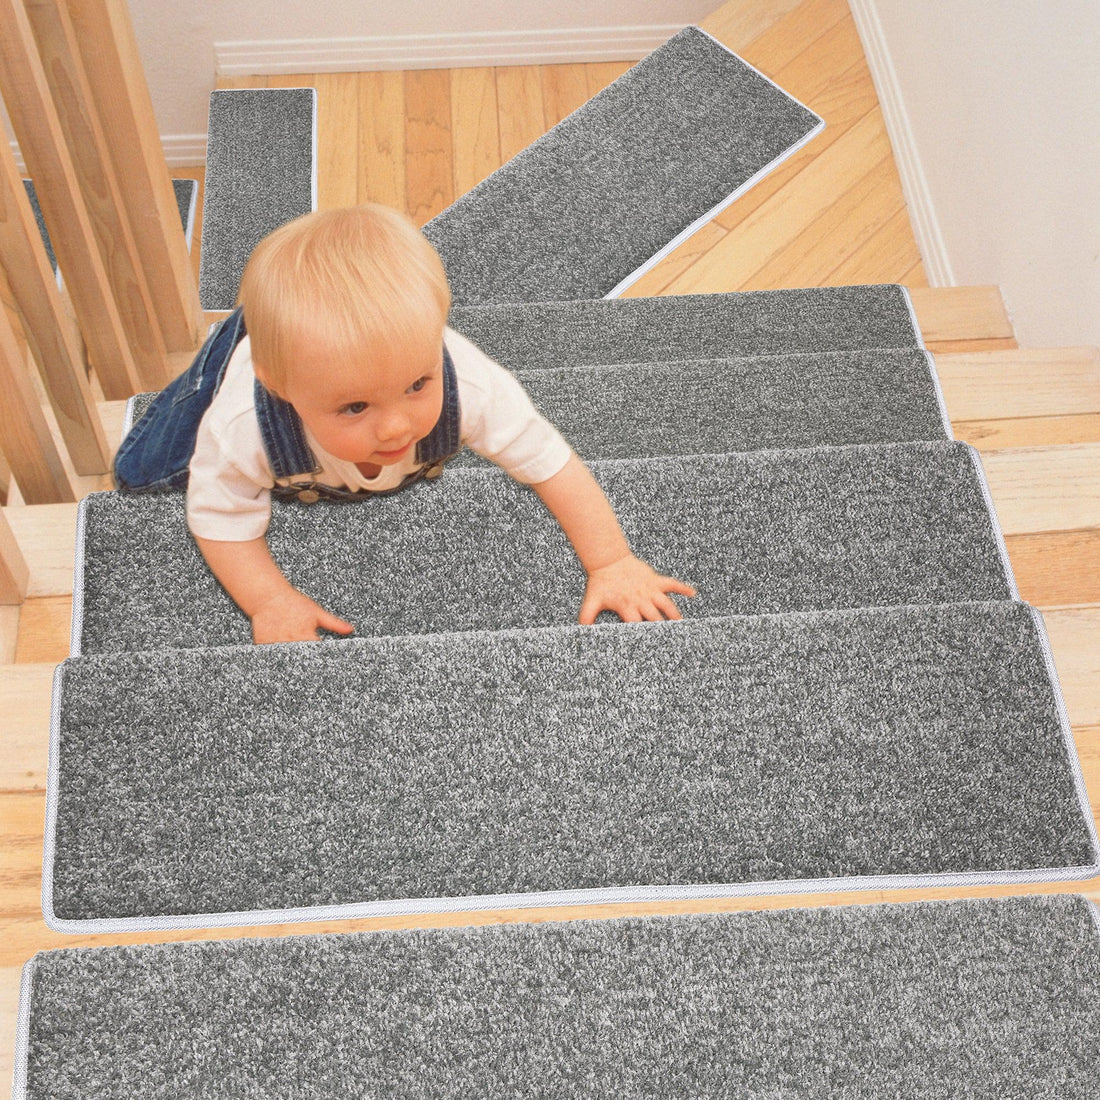 Rubber Step Guards/Stair Mats- Set of 2